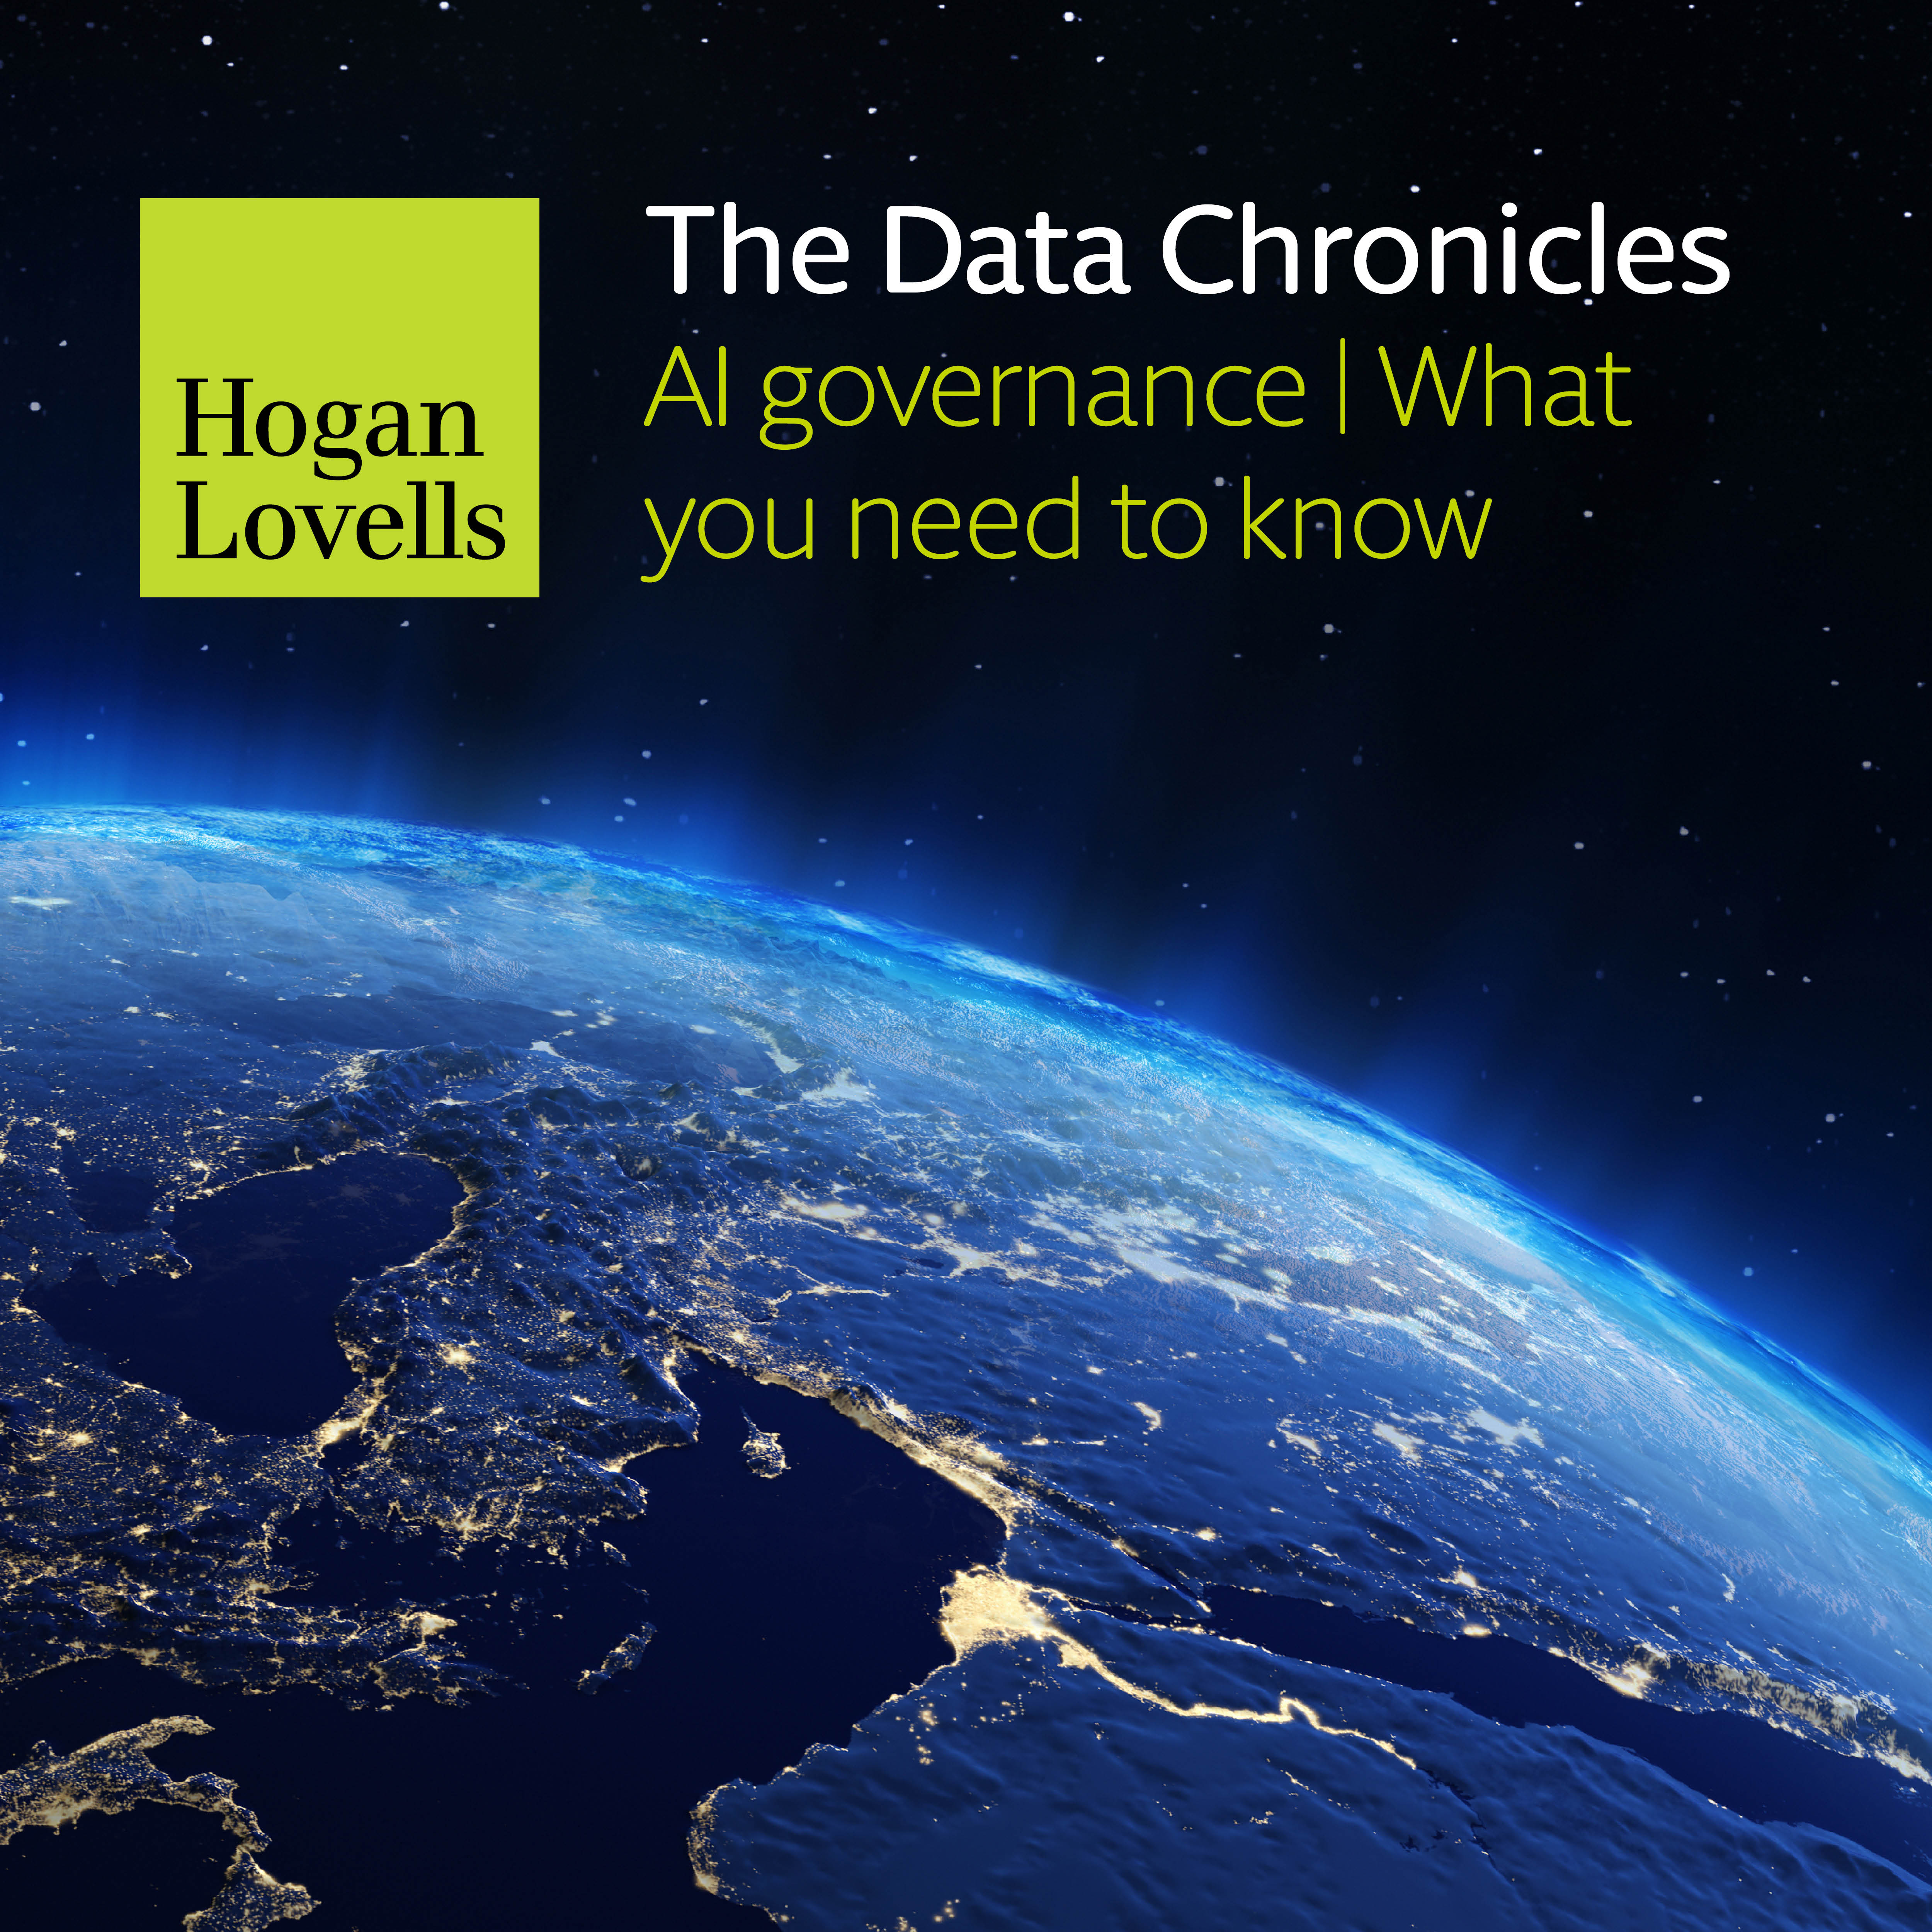 The Data Chronicles_AI governance what you need to know